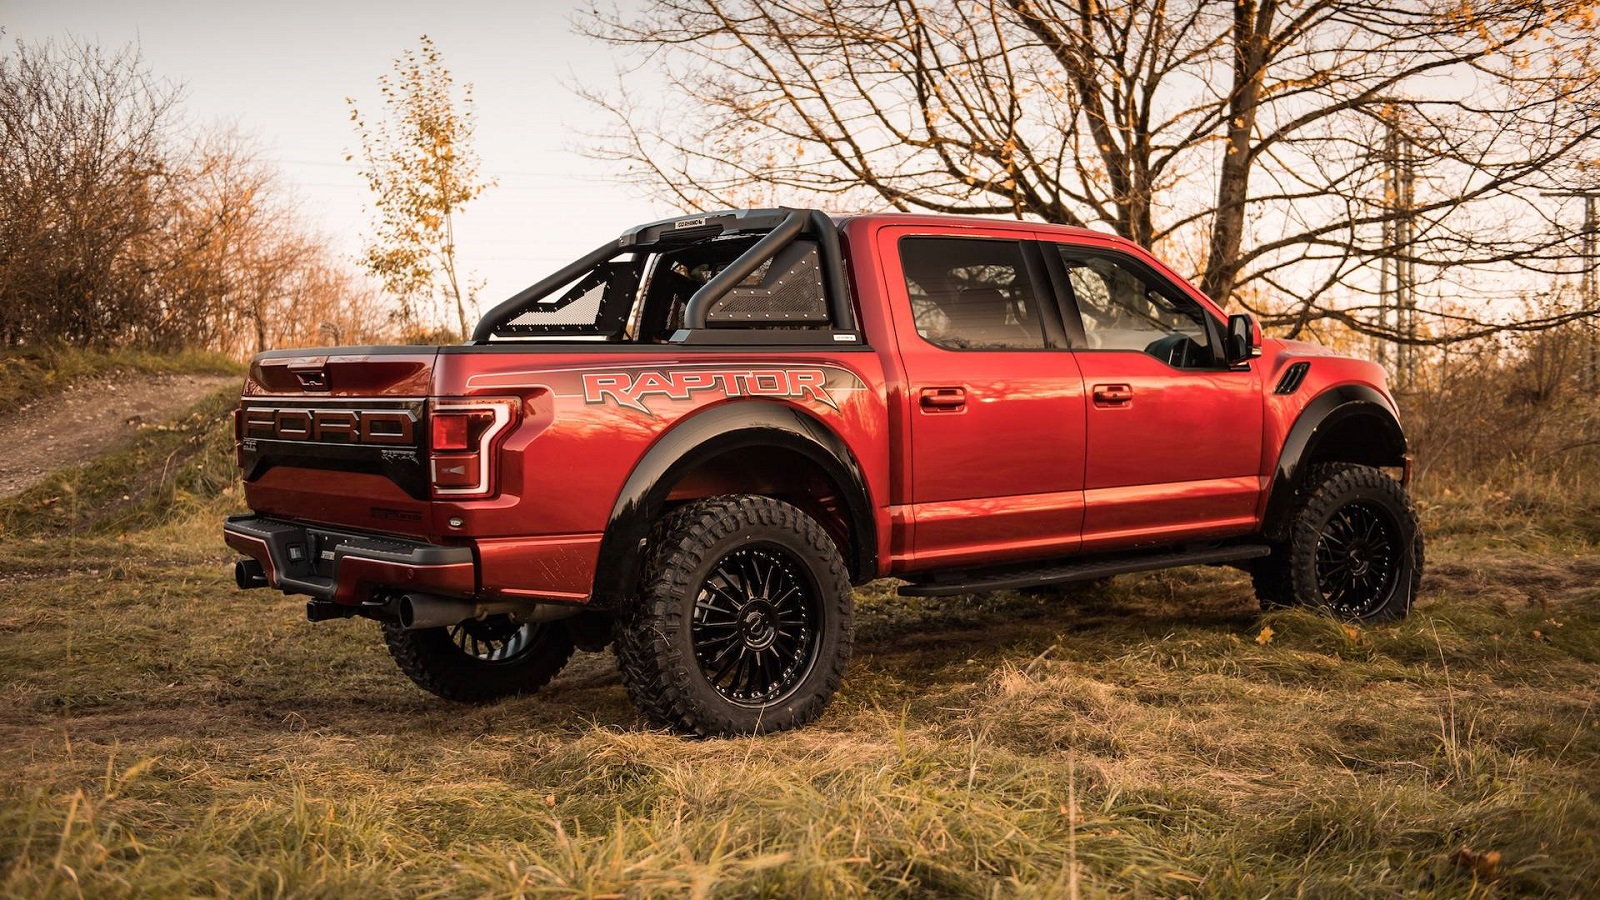 Daily Slideshow: GeigerCars Builds a German Tuned Ford Raptor